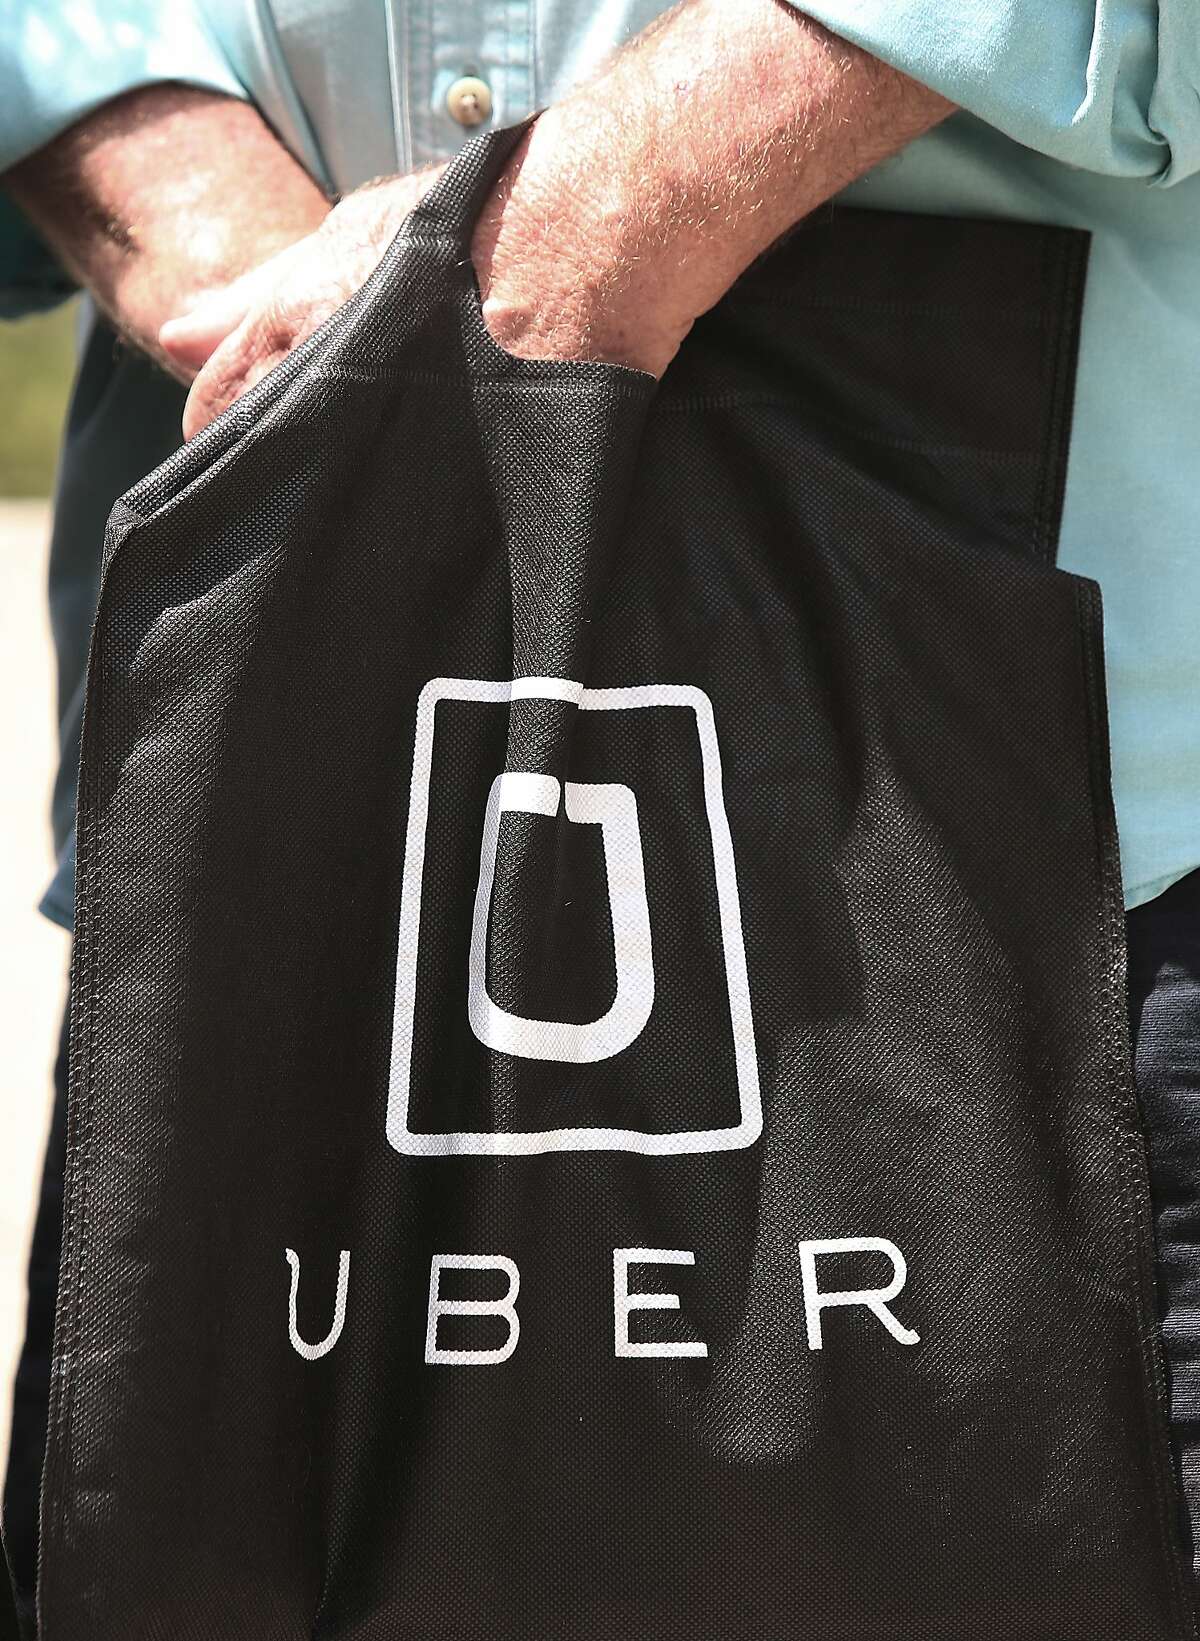 An Uber driver holds an Uber bag during a press conference at the plaza entrance of 450 Golden Gate Ave. in San Francisco, Calif., on Thursday, August 6, 2015. Boutrous and Uber drivers discuss the O'Conner vs. Uber lawsuit seeking to reclassify Uber drivers in California as employees.